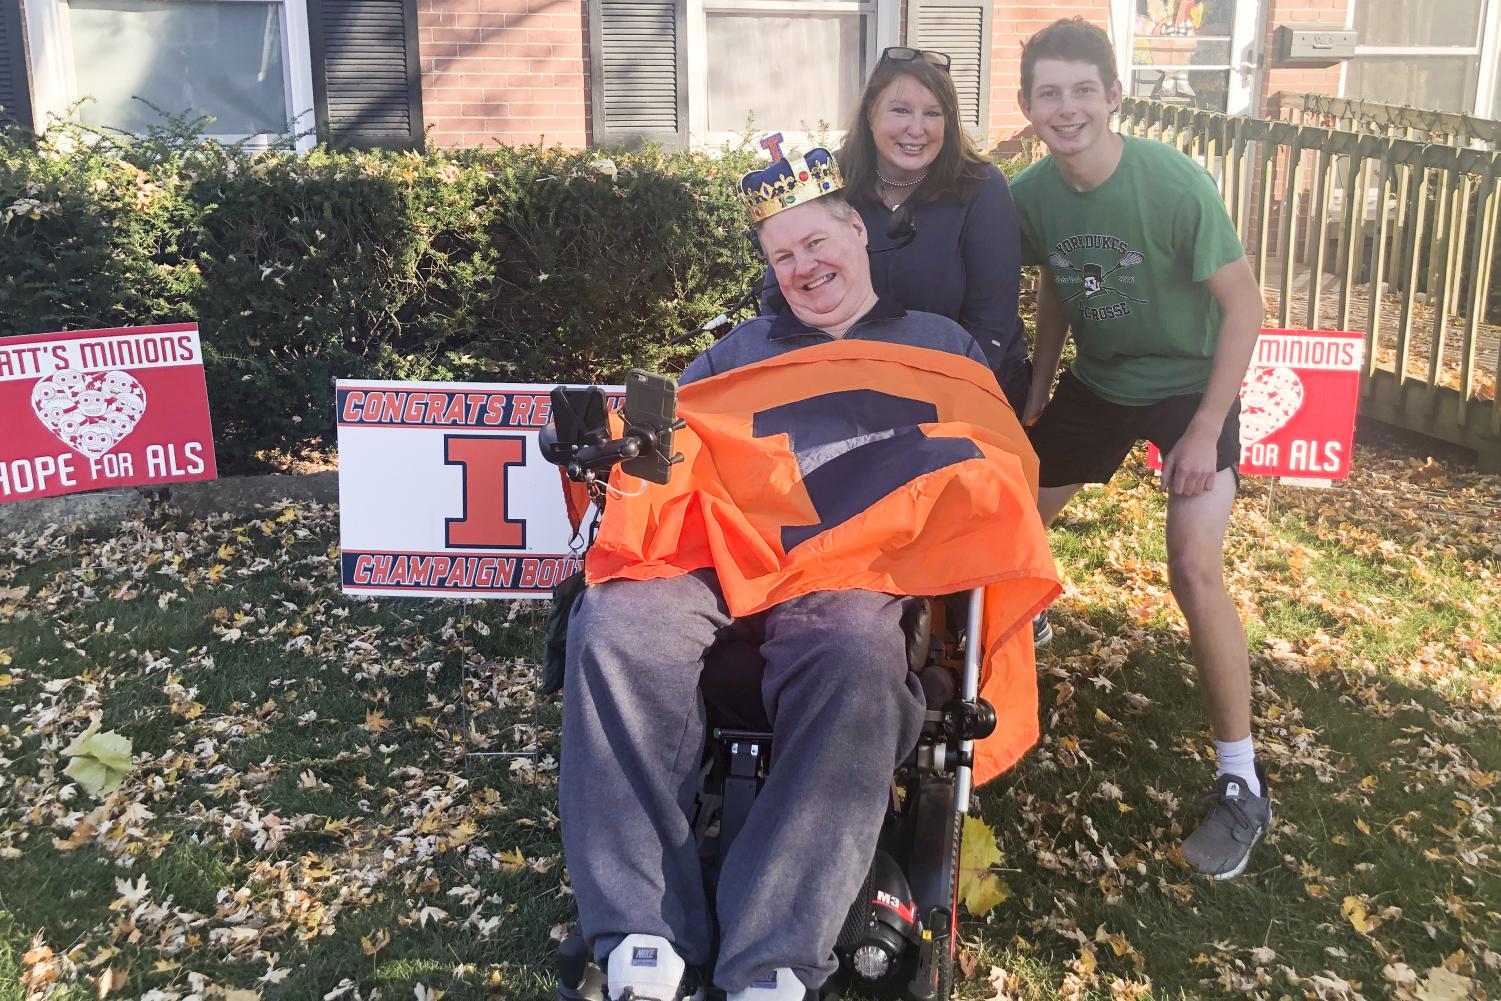 Dads Weekend festivities return to campus The Daily Illini